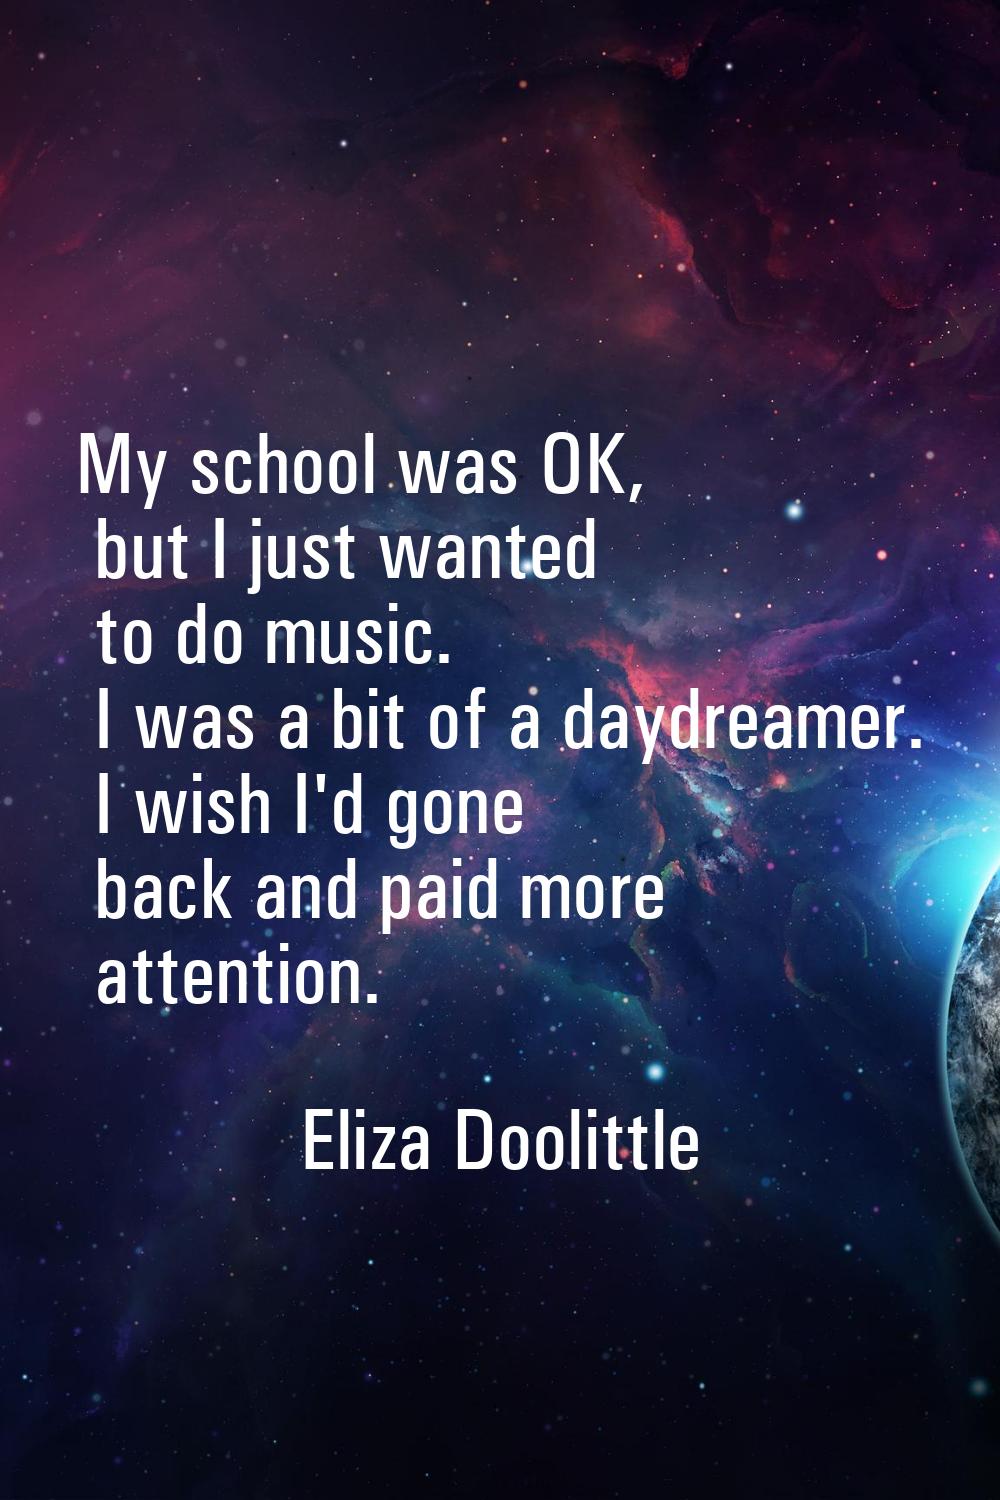 My school was OK, but I just wanted to do music. I was a bit of a daydreamer. I wish I'd gone back 